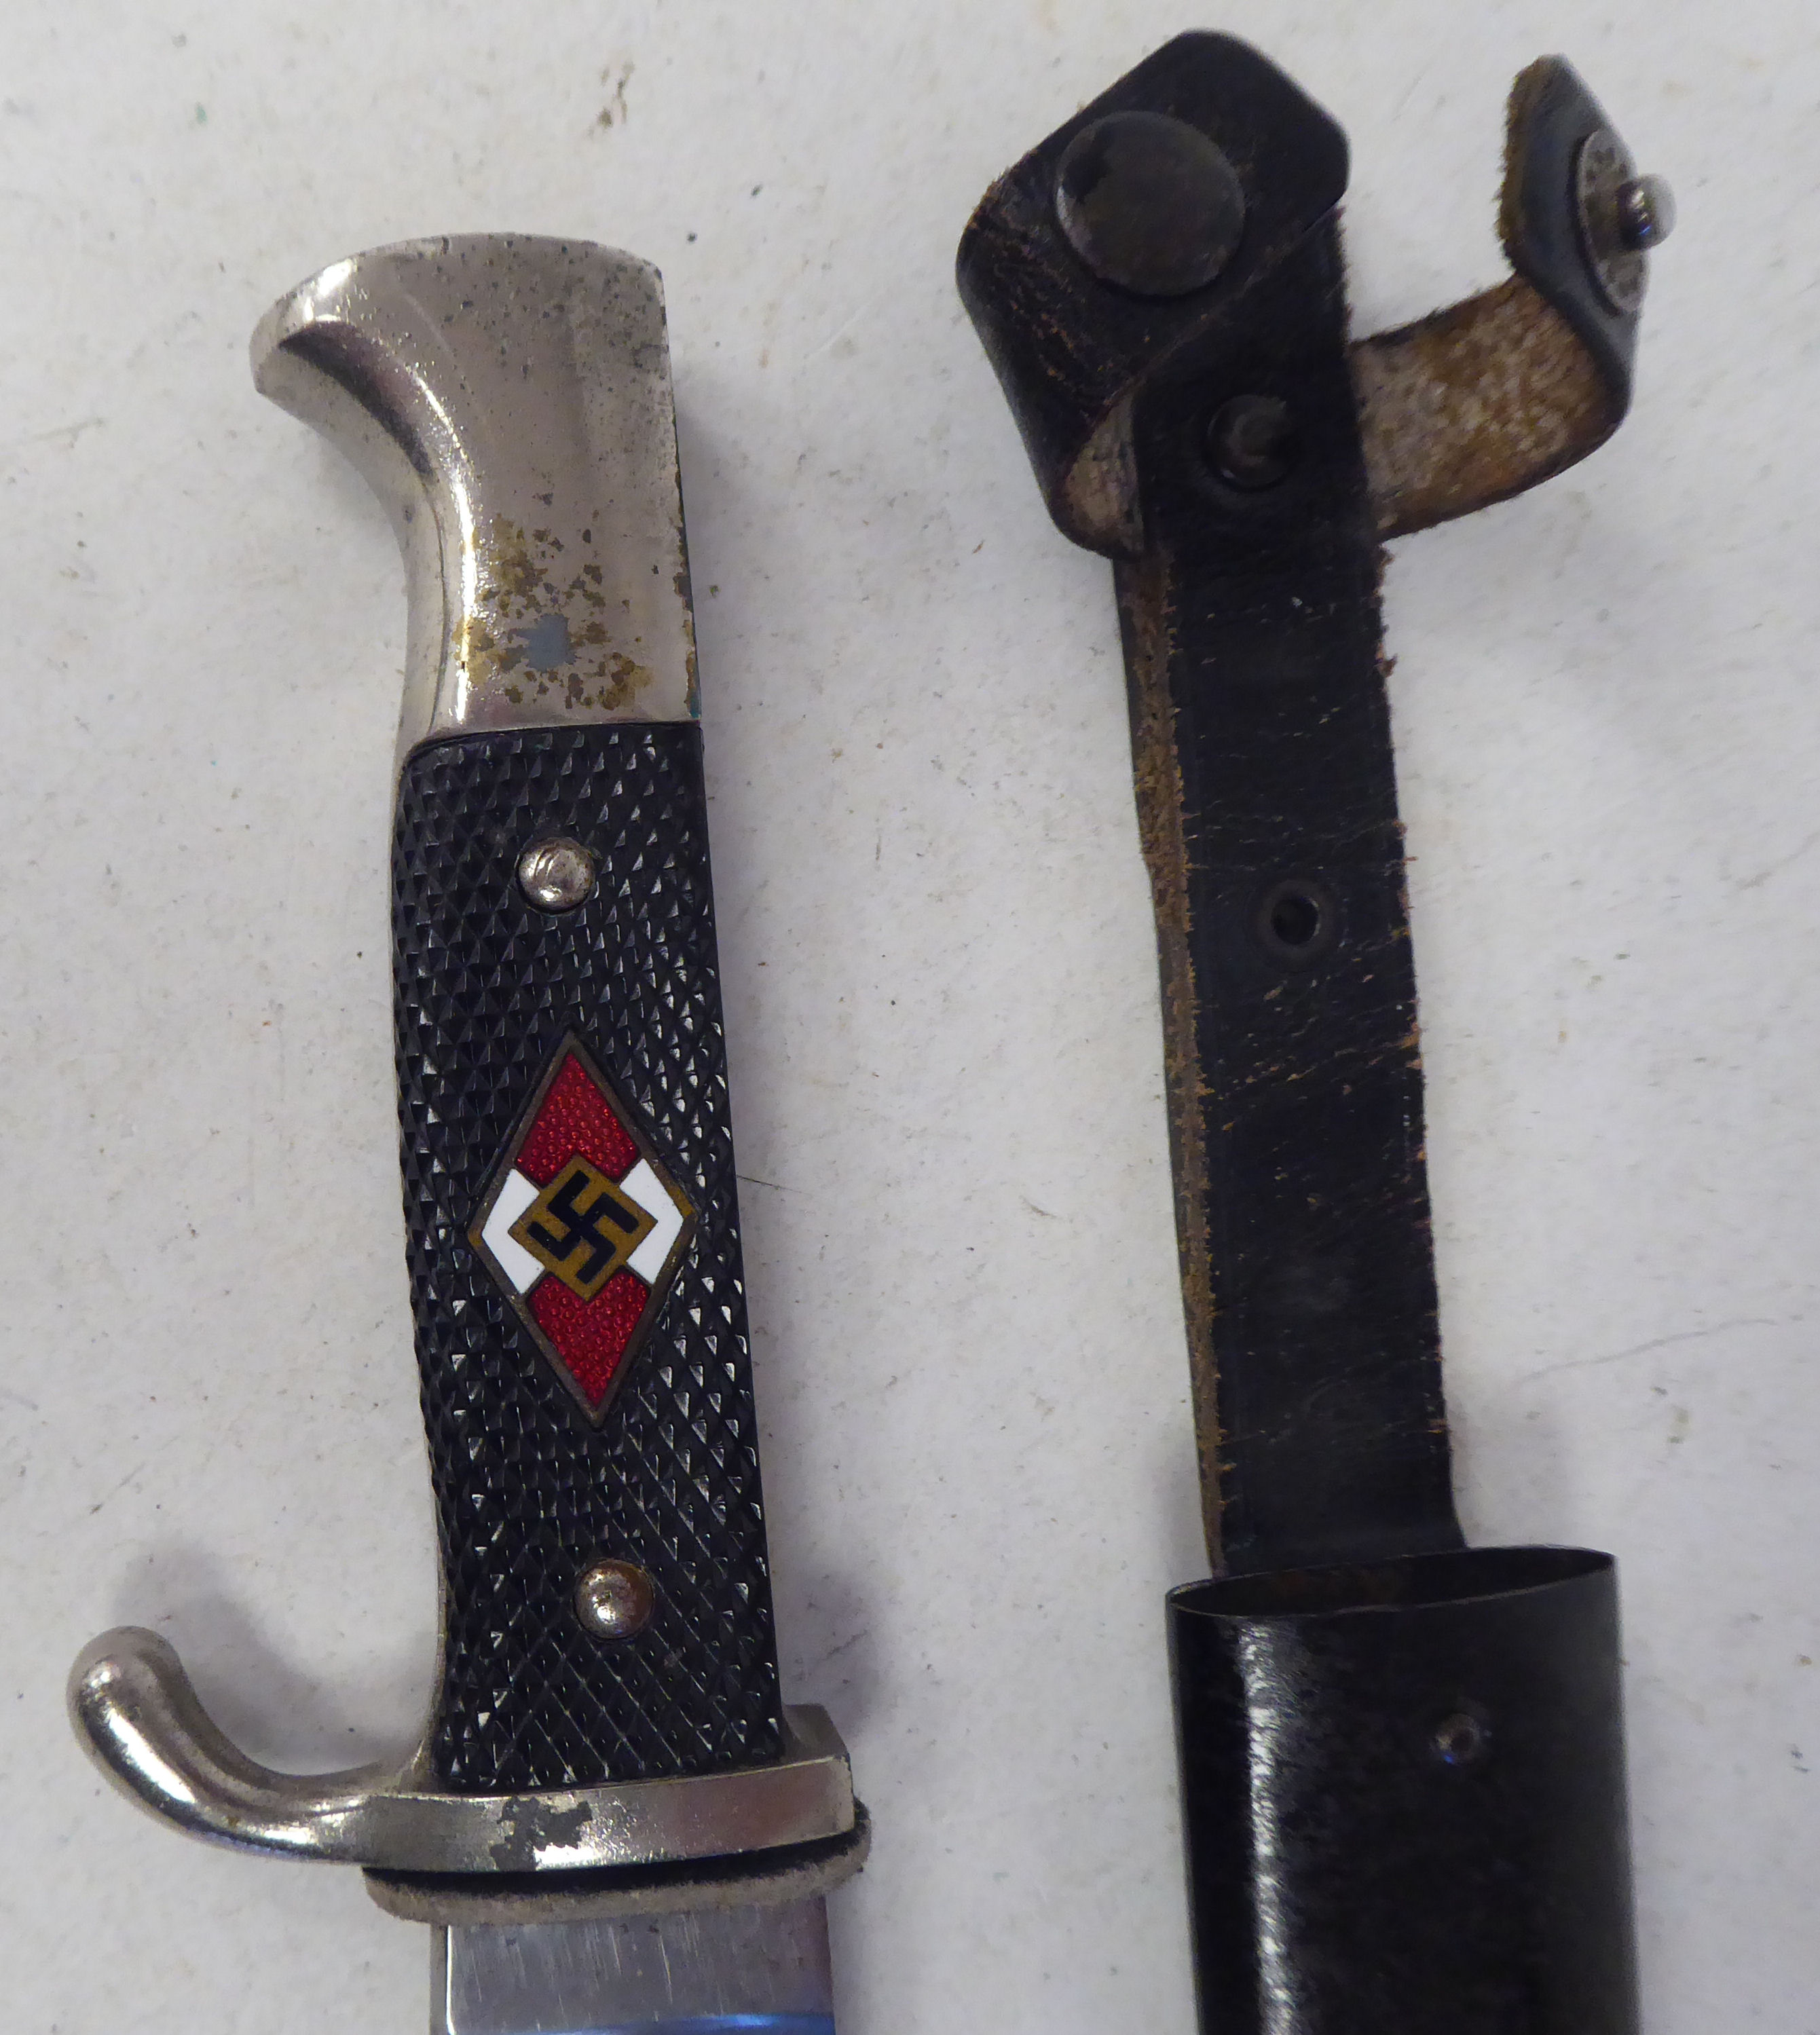 A German Third Reich era Hitler Youth knife with a rivetted two-part handgrip and emblem, the - Image 2 of 4